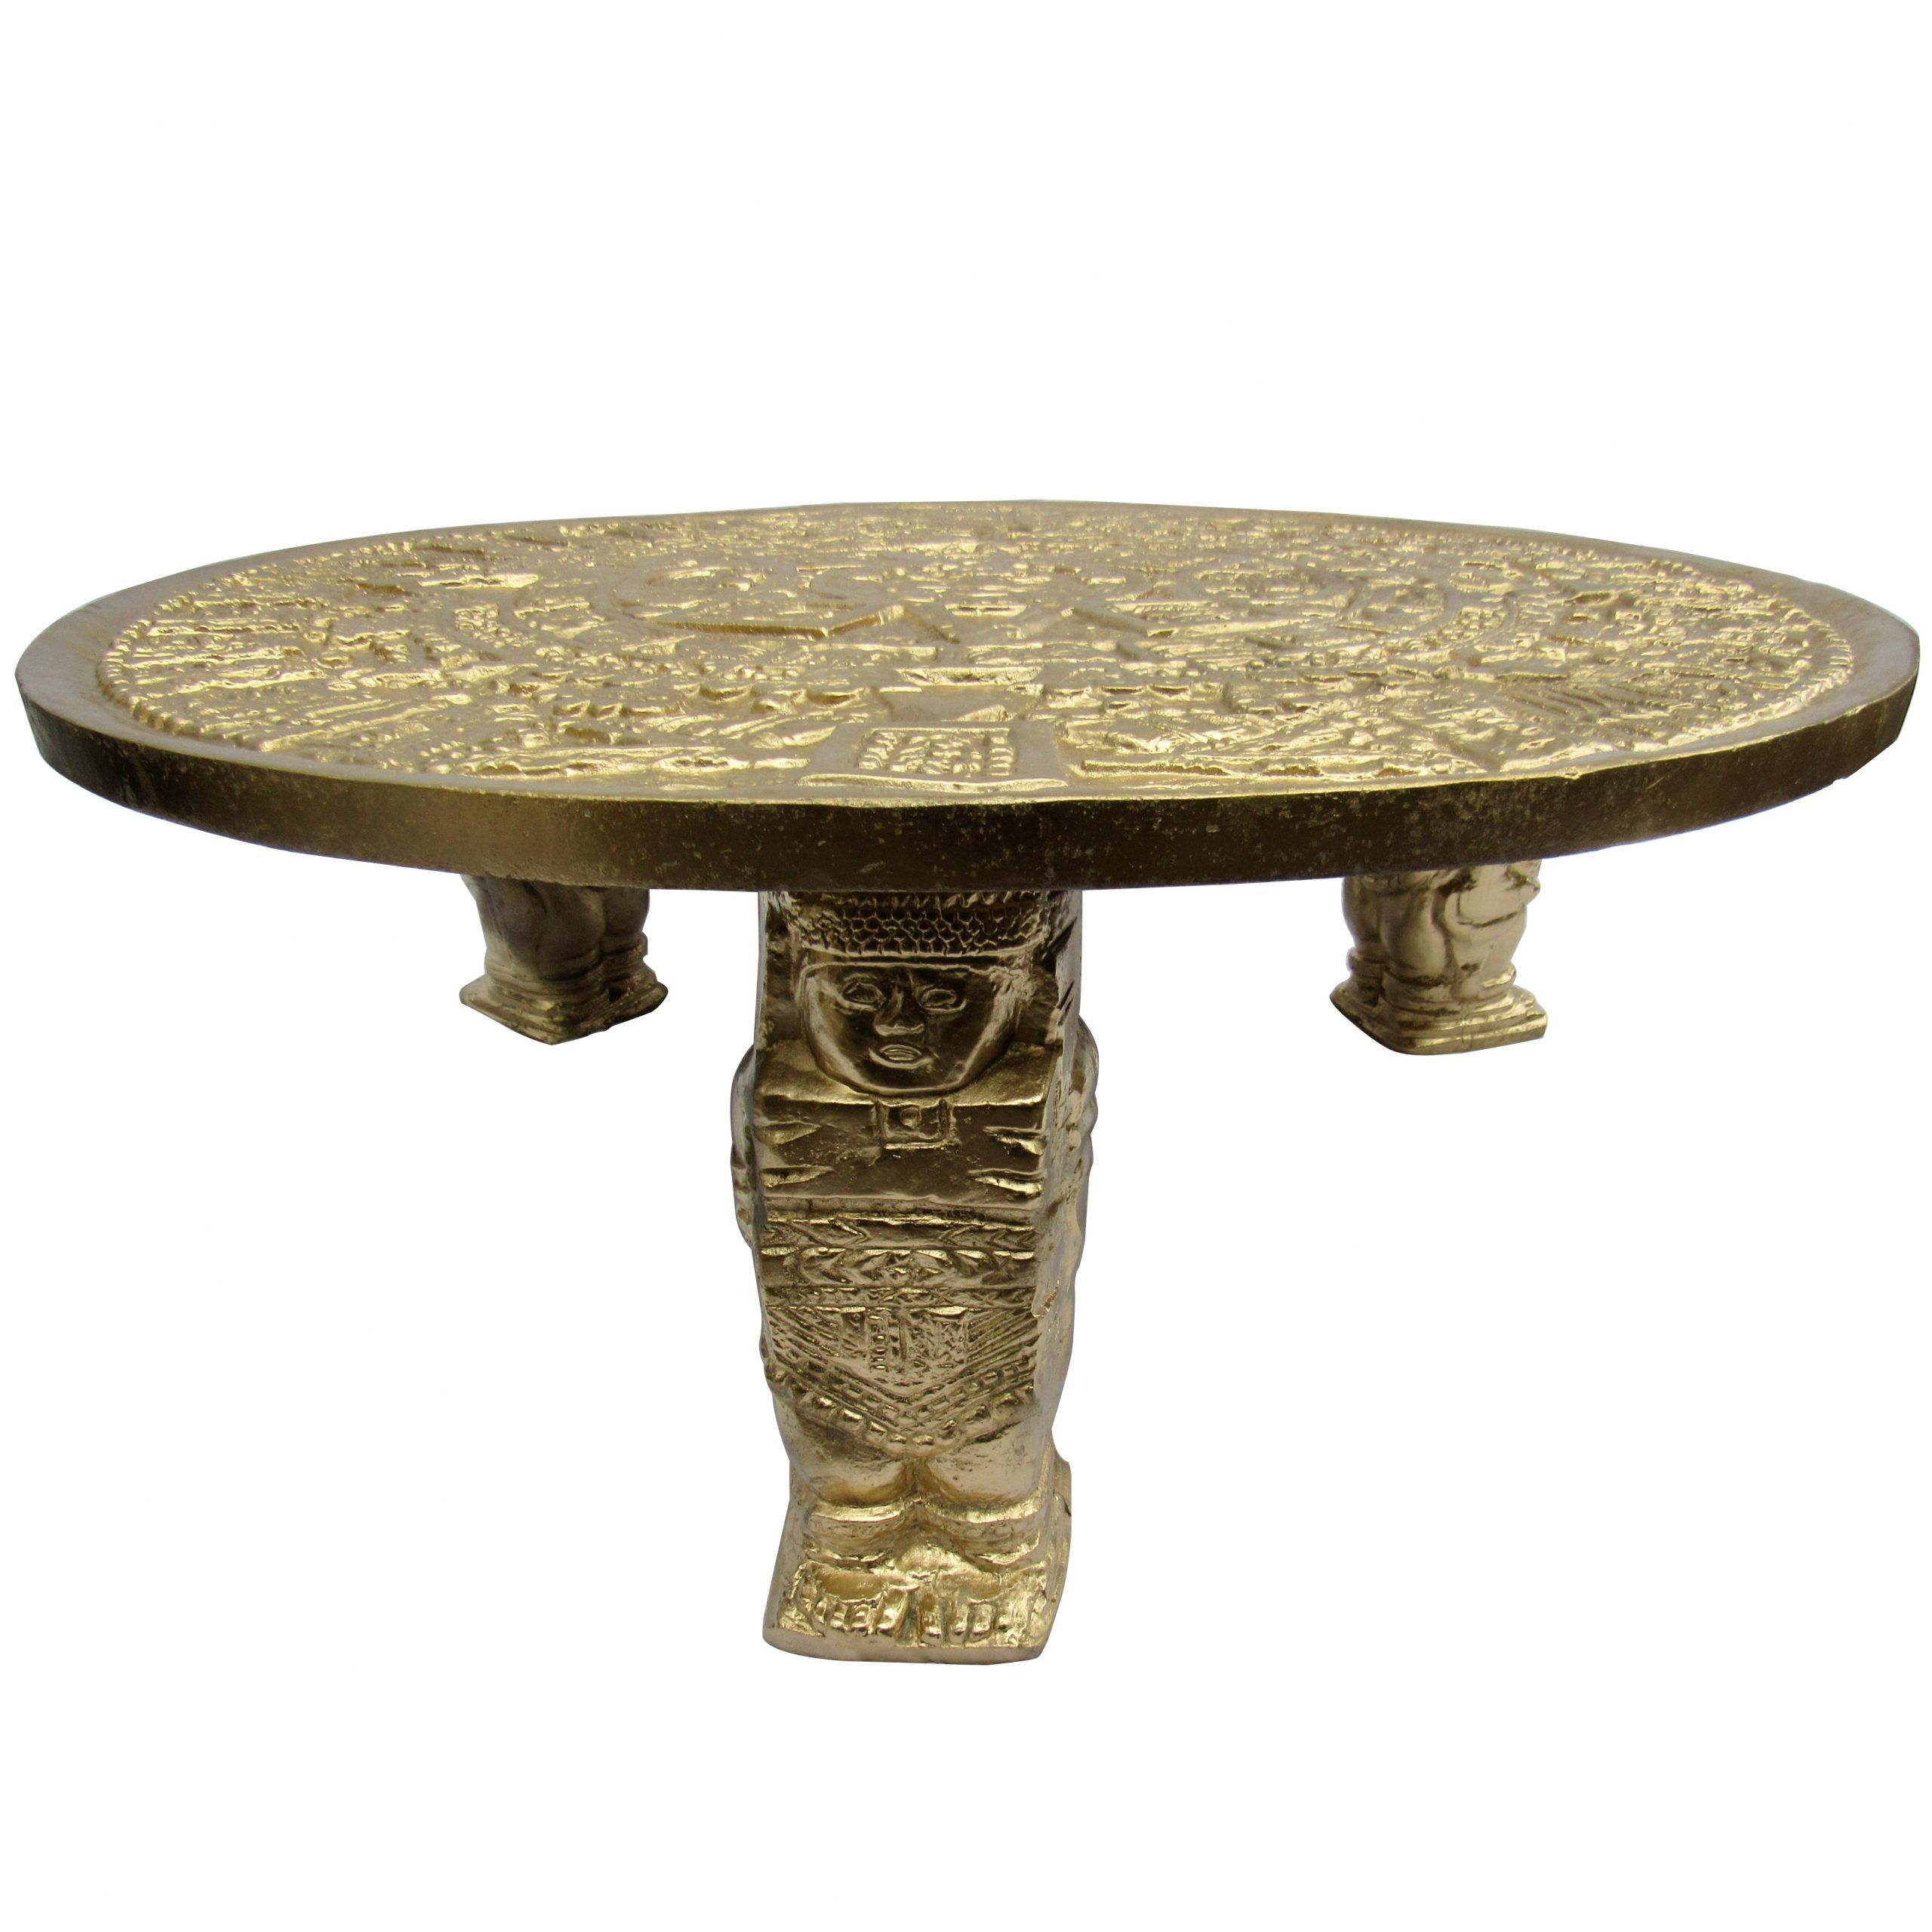 Gilt Bas  Relief Aztec Calendar Coffee Table Cast Aluminium, Mexican, 1960S Intended For Most Up To Date Aztec Round Pedestal Dining Tables (View 15 of 25)